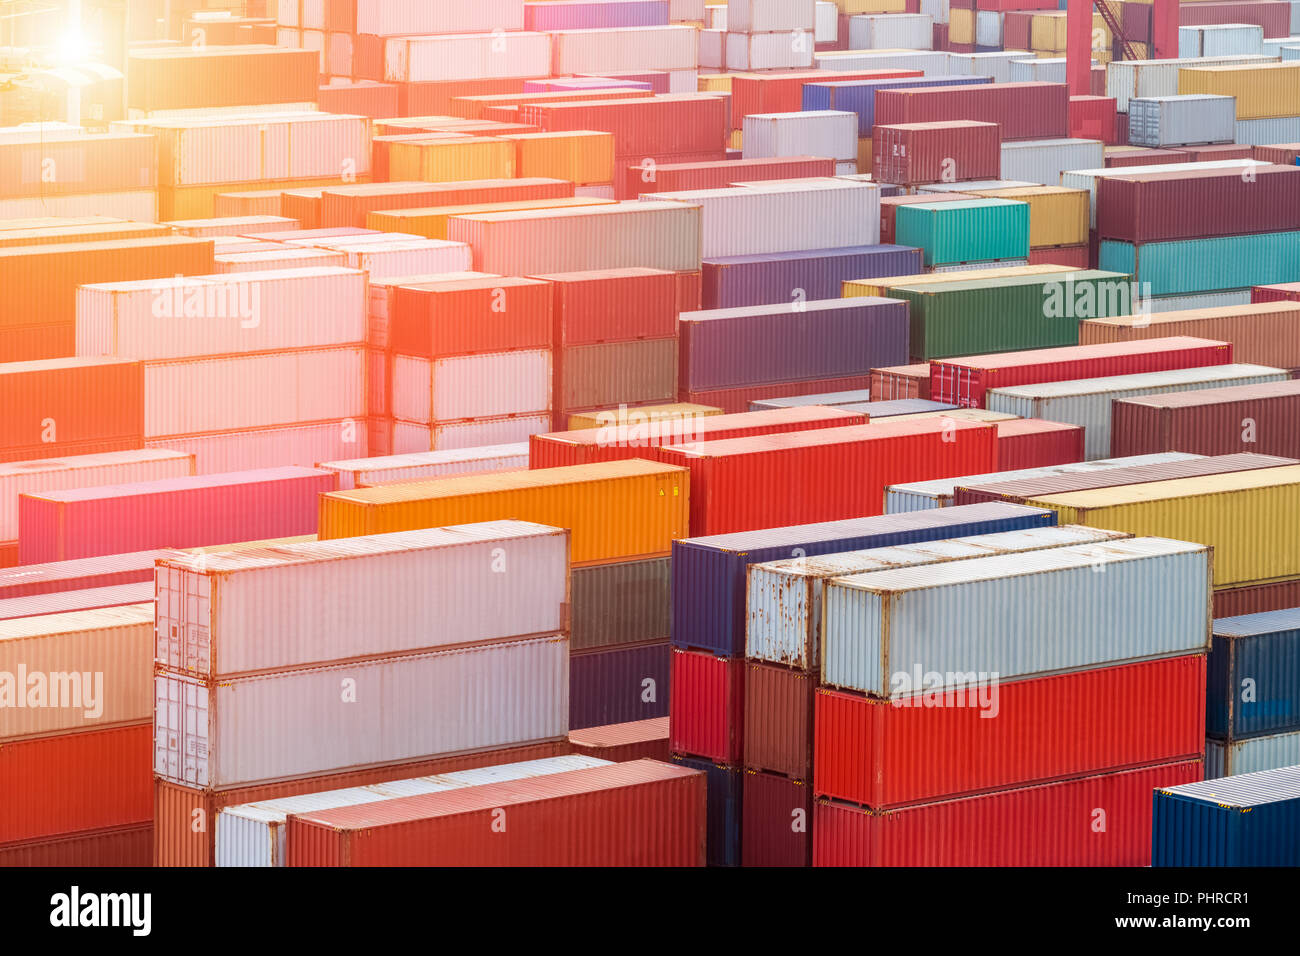 container yard in sunset Stock Photo